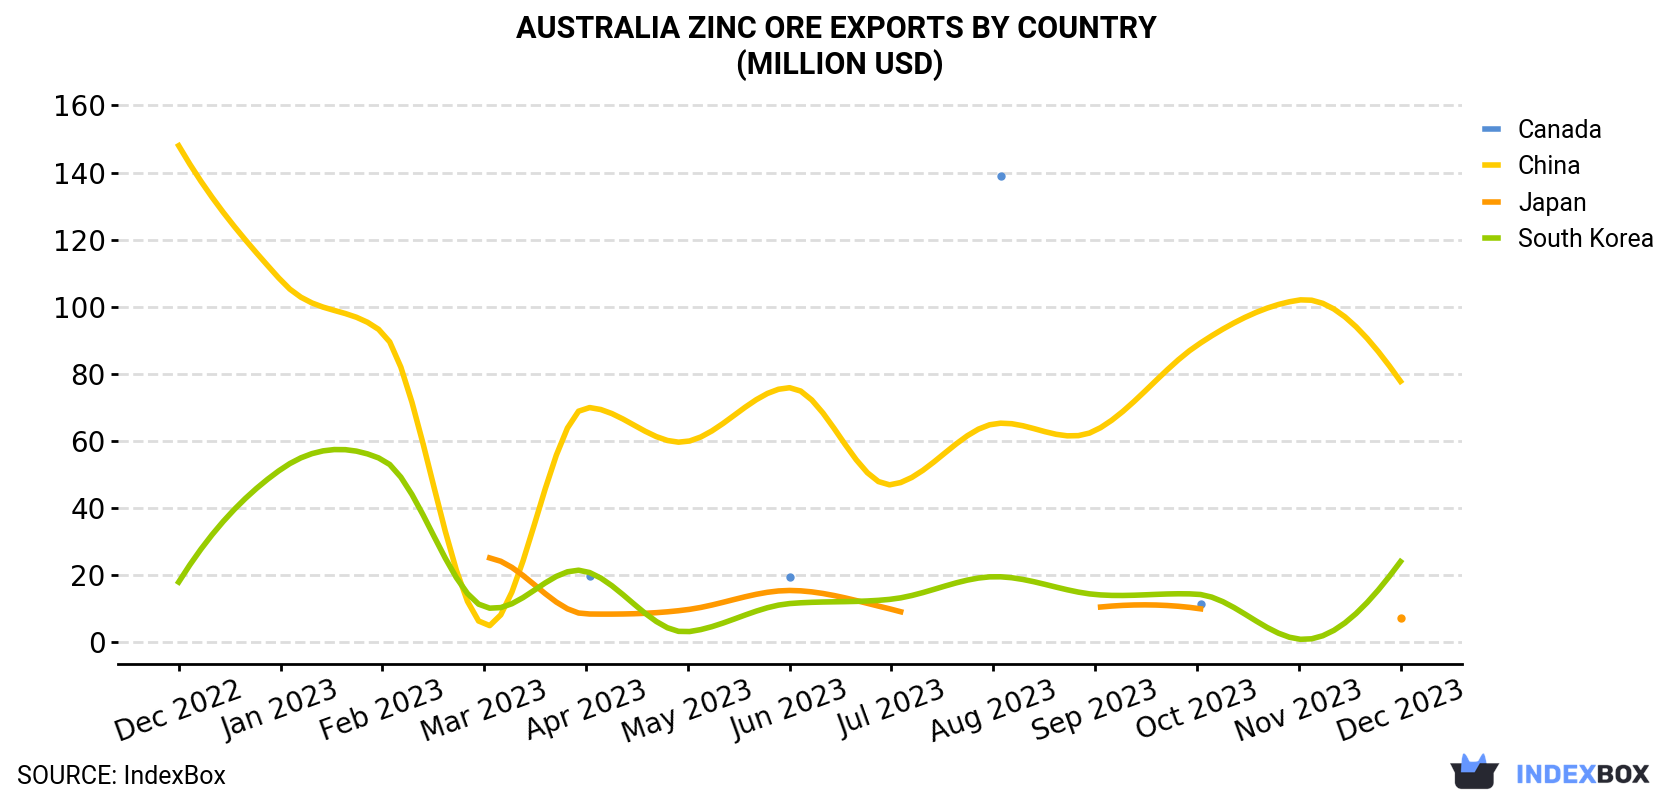 Australia Zinc Ore Exports By Country (Million USD)